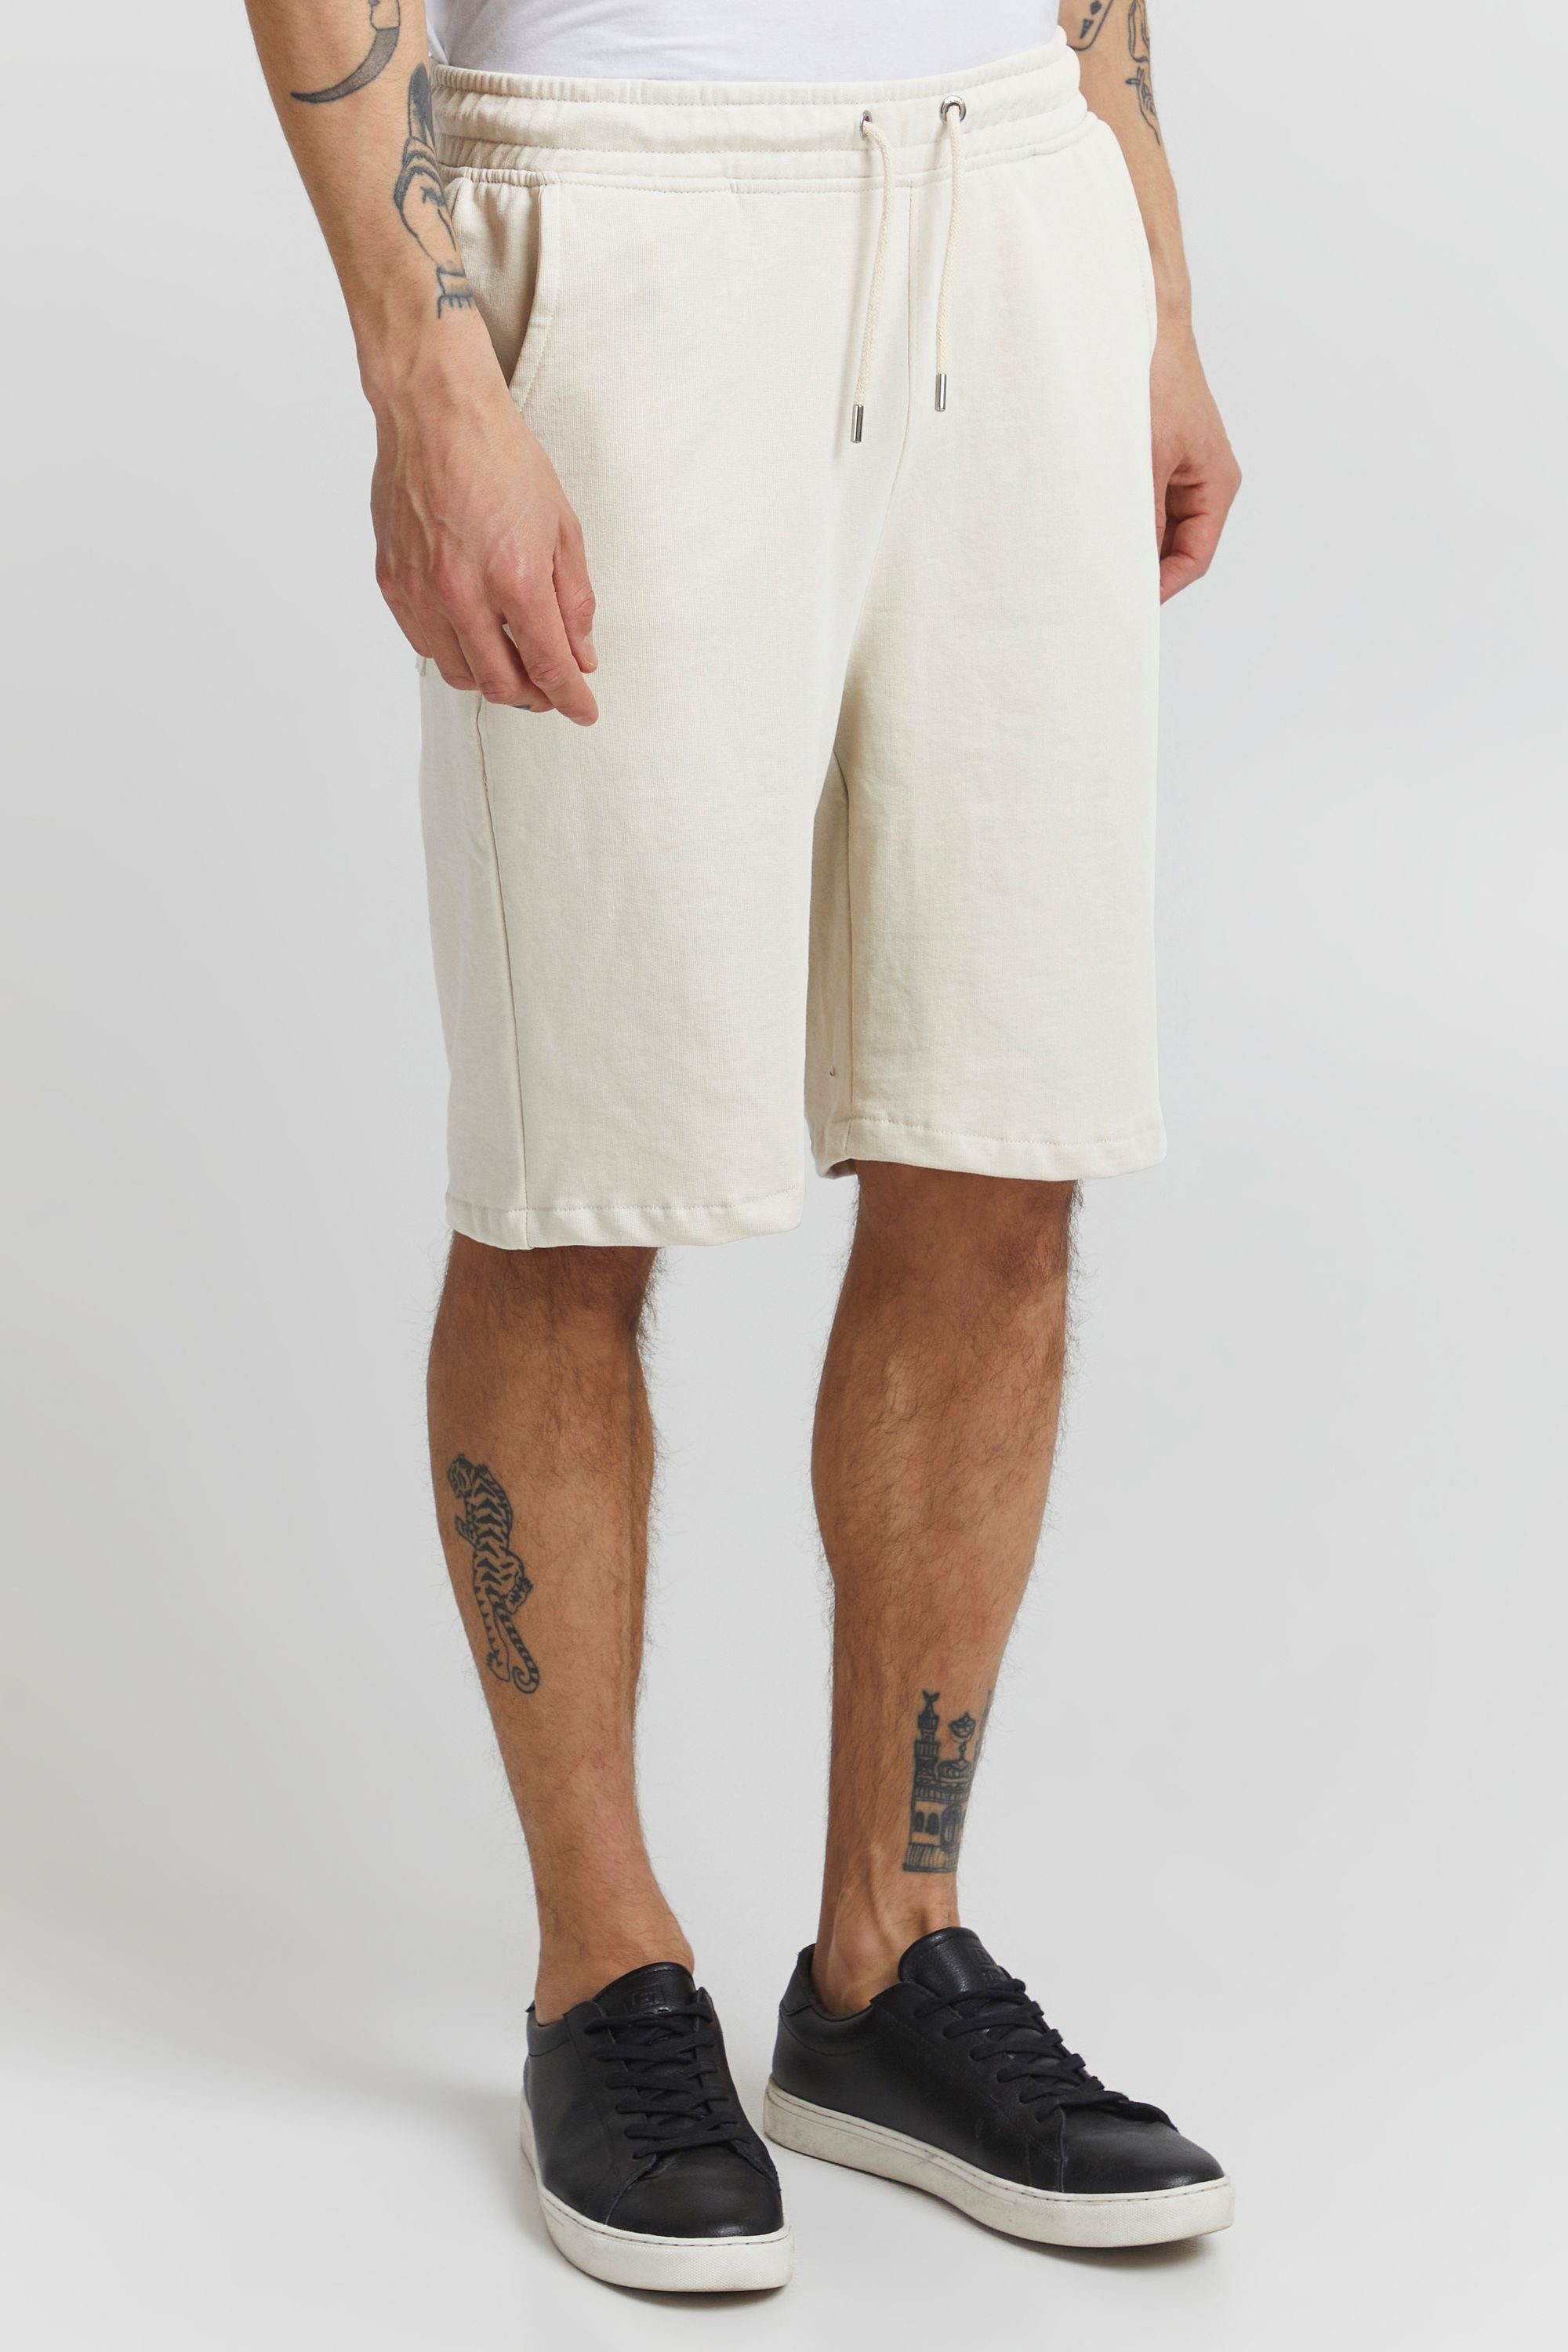 OATMEAL - SDBrenden SHO Relaxshorts !Solid 21106991 (130401)